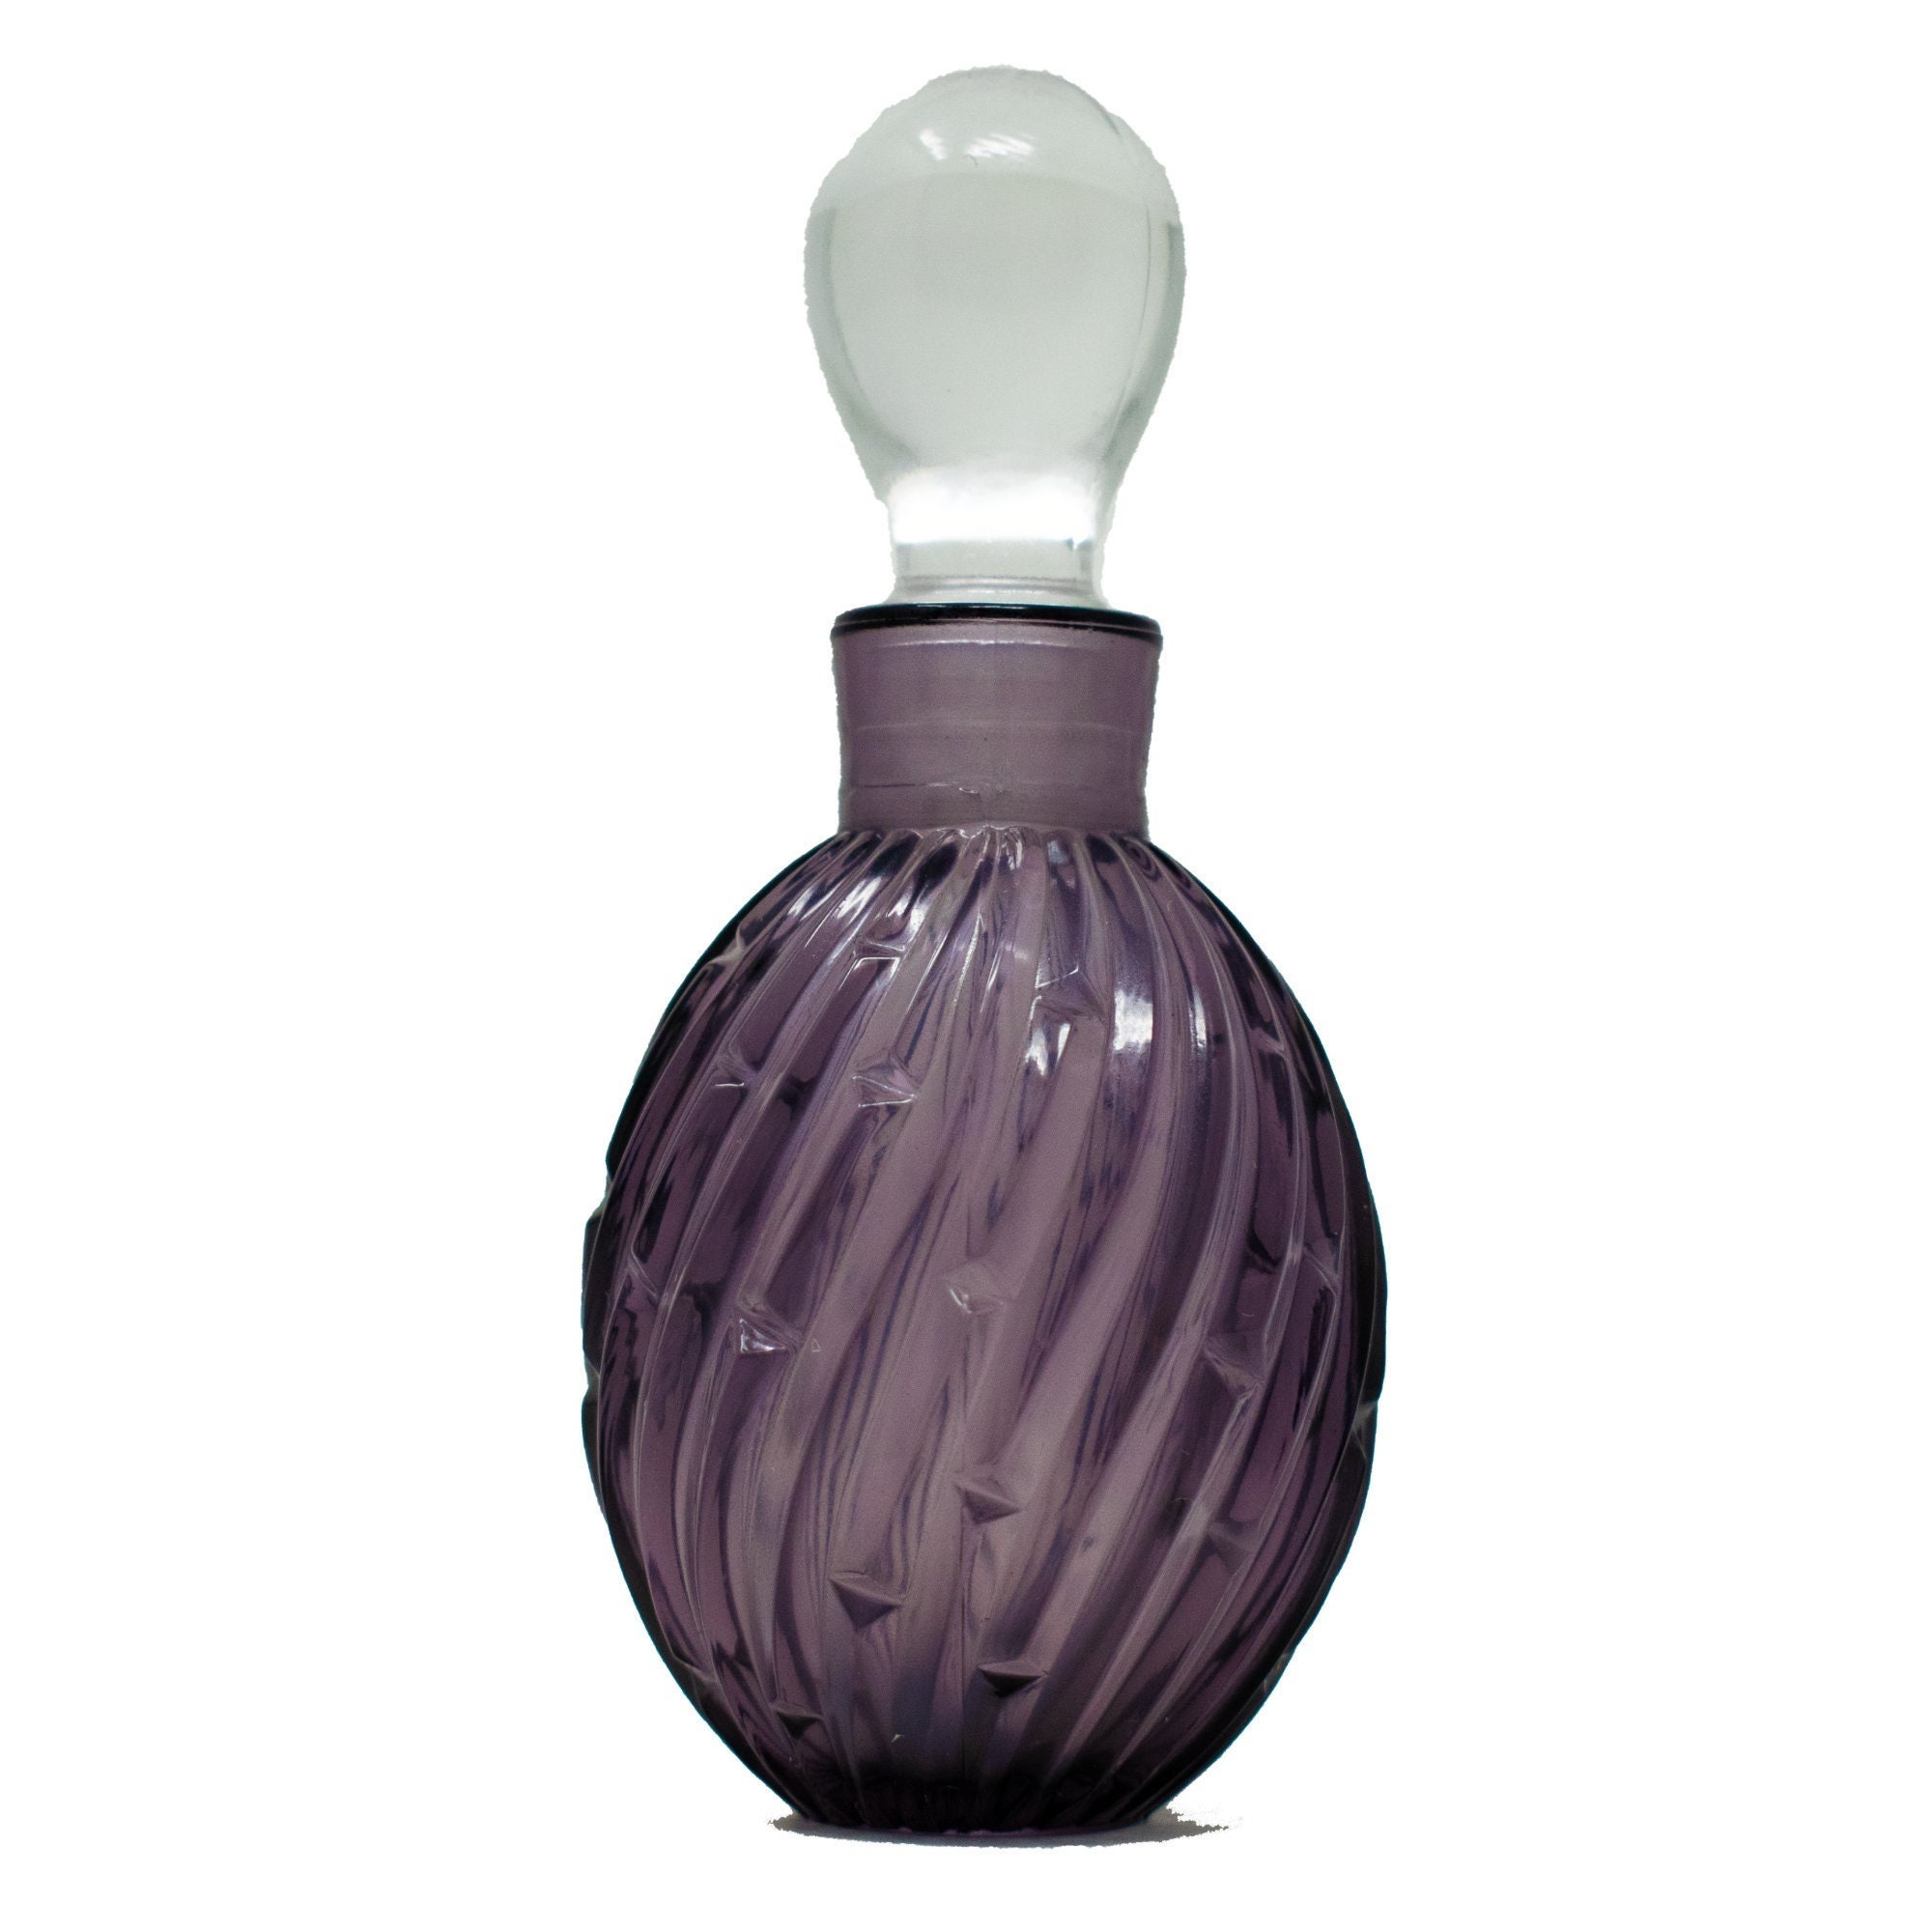 Danish Modern Cloisonné Perfume Bottle with Sweet Violets Scarlet  Pentameter and Lalique Top Note · Creative Fabrica